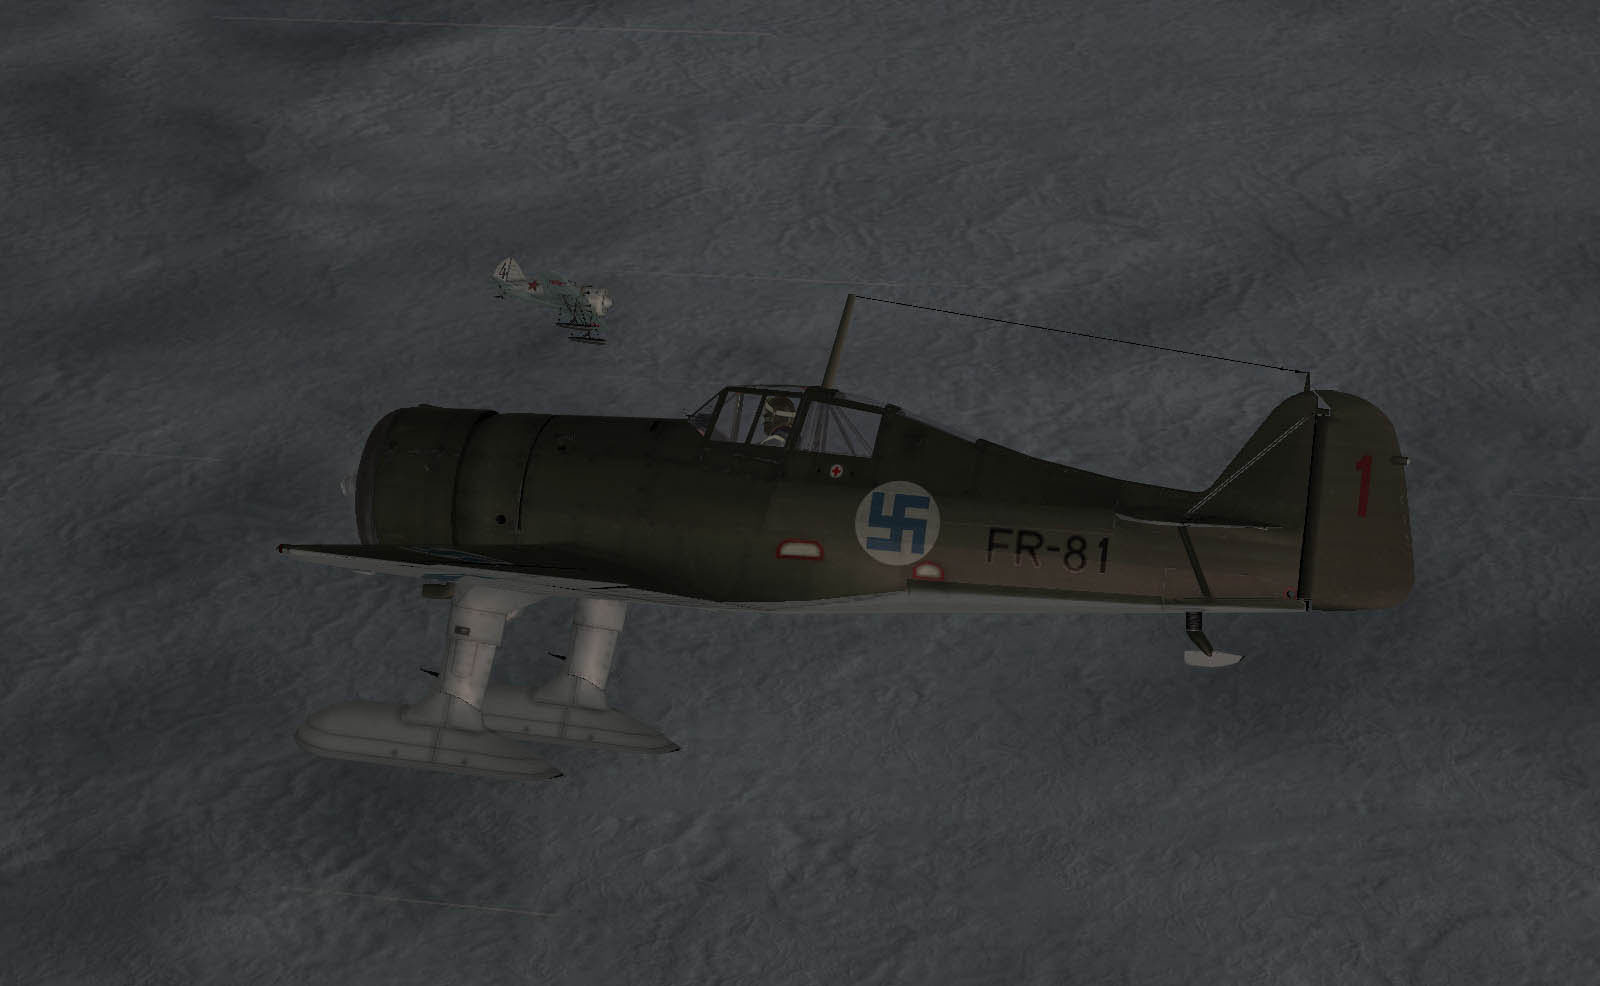 DXXI in dodfight with I-16 Finland 10/1939